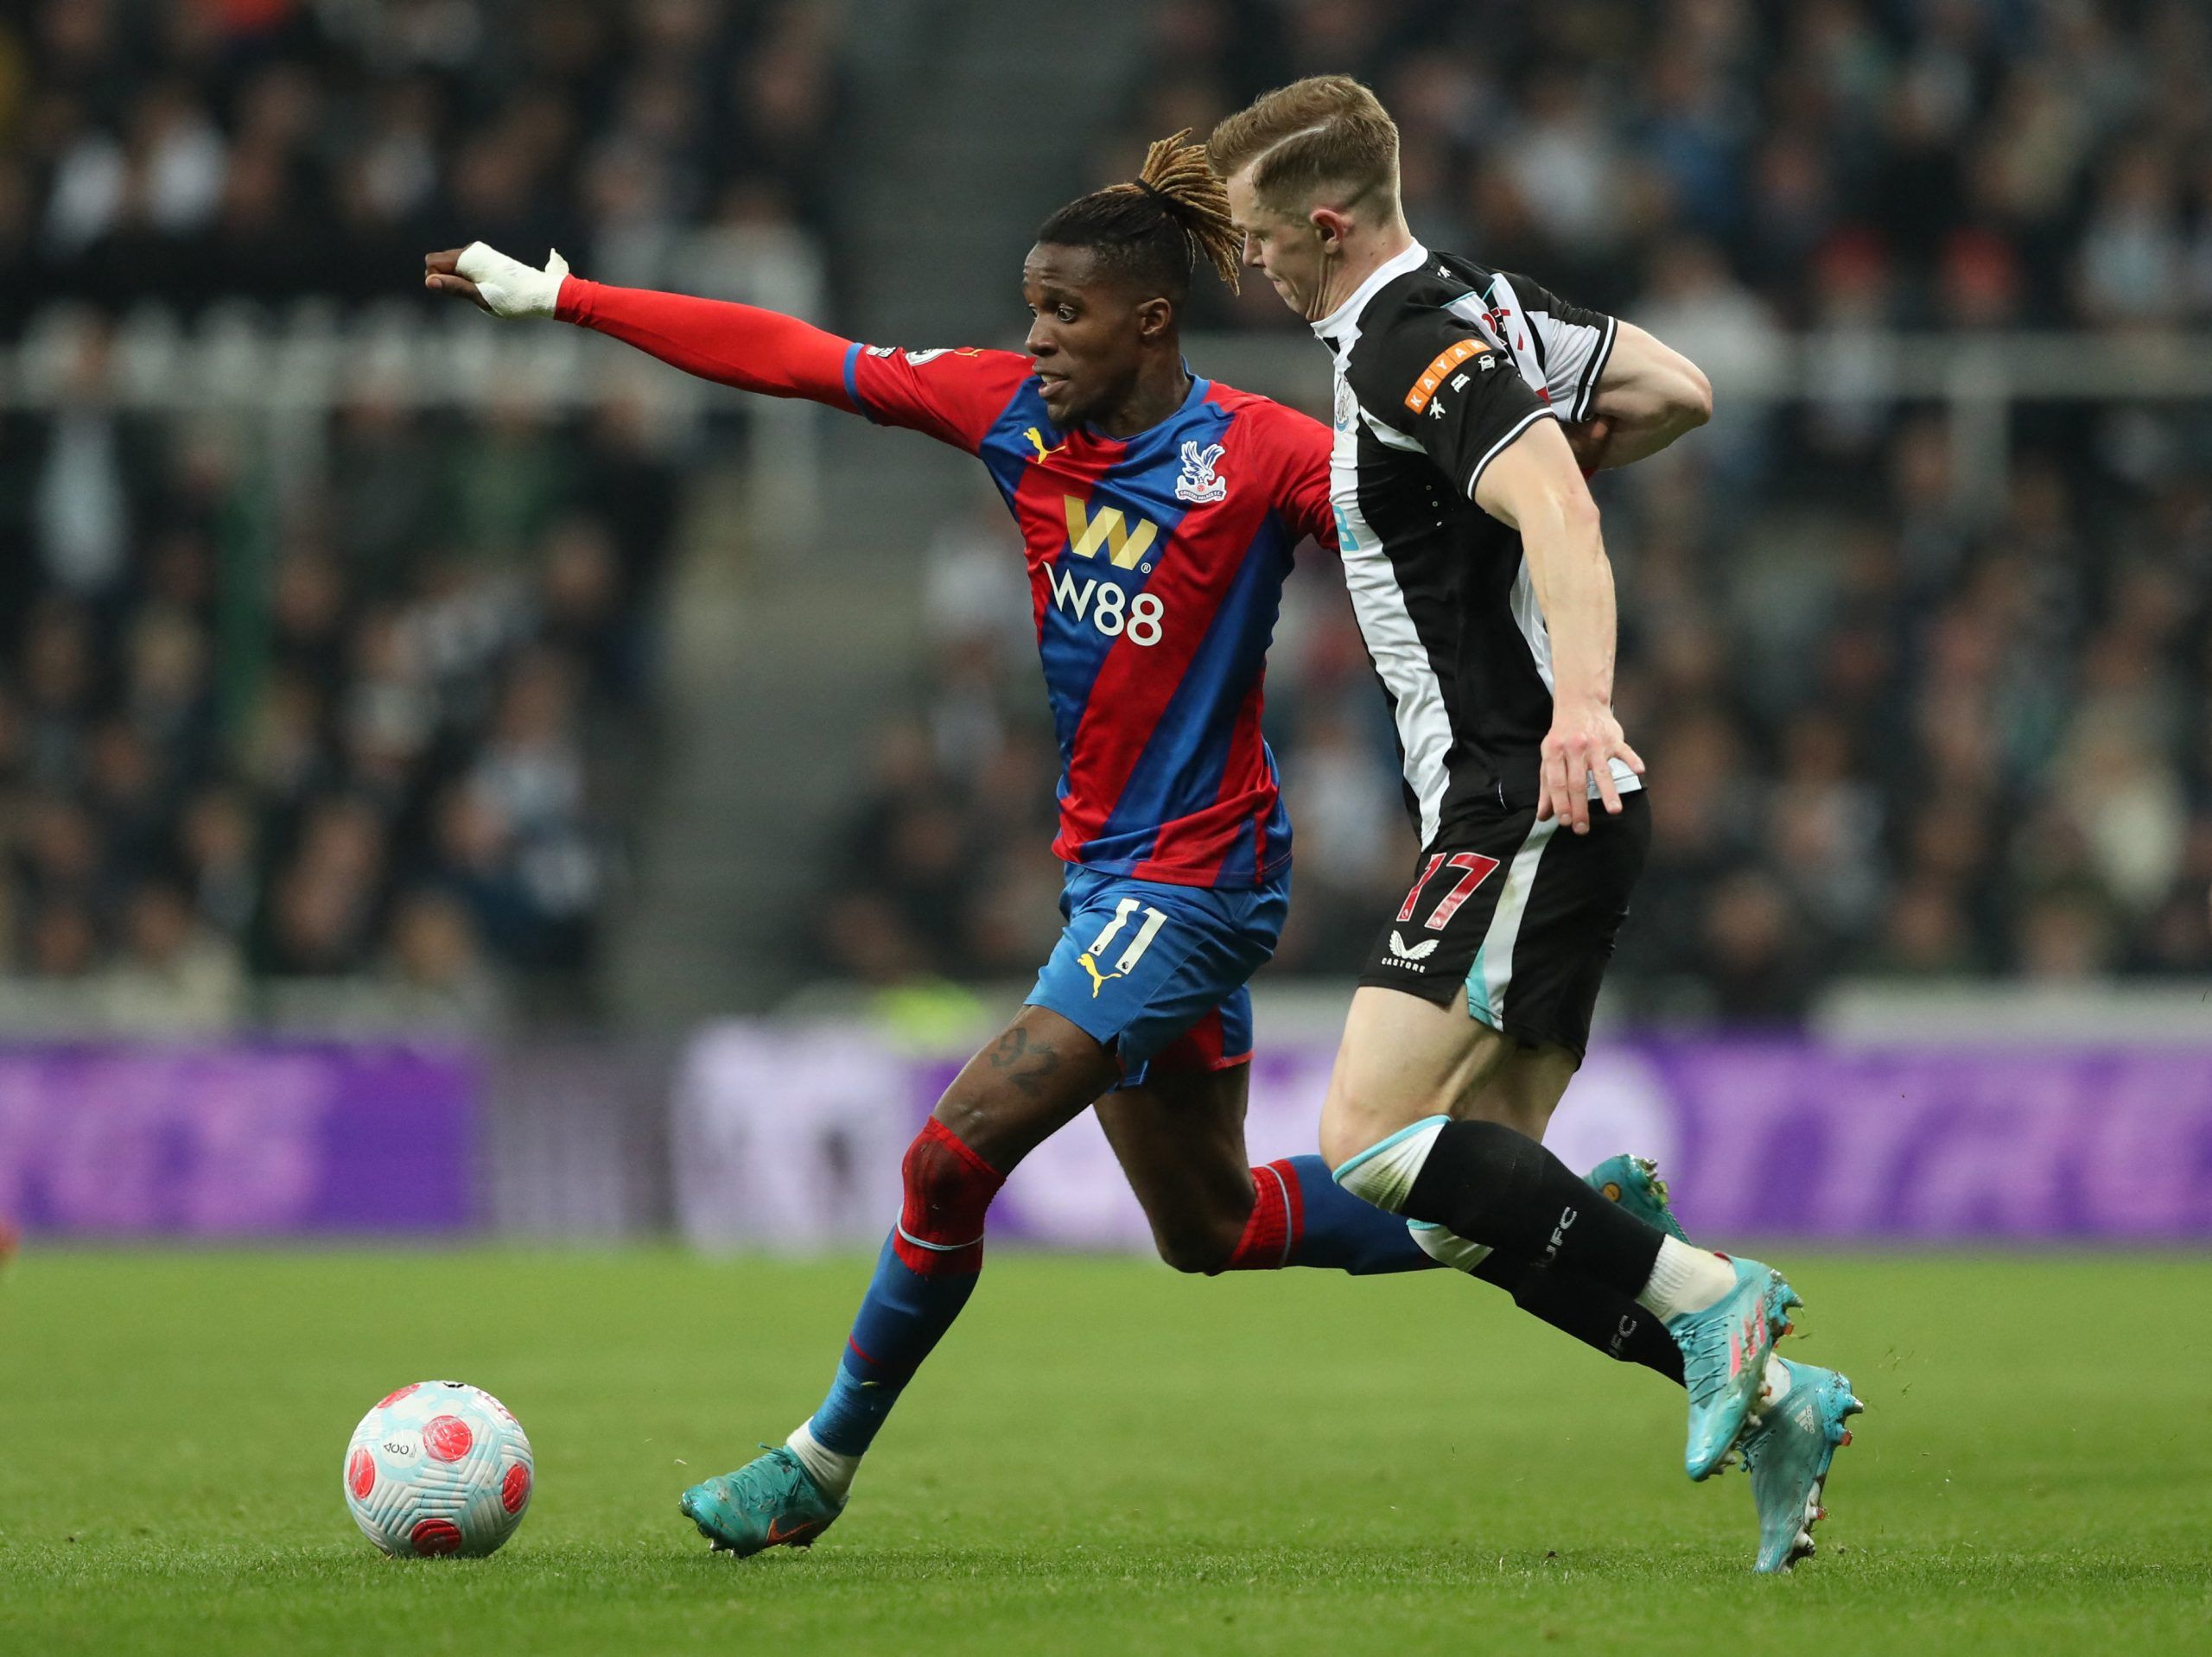 Newcastle United's Emil Krafth in action with Crystal Palace's Wilfried Zaha Soccer Football - Premier League - Newcastle United v Crystal Palace - St James' Park, Newcastle, Britain - April 20, 2022  Newcastle United's Emil Krafth in action with Crystal Palace's Wilfried Zaha REUTERS/Scott Heppell EDITORIAL USE ONLY. No use with unauthorized audio, video, data, fixture lists, club/league logos or 'live' services. Online in-match use limited to 75 images, no video emulation. No use in betting, g